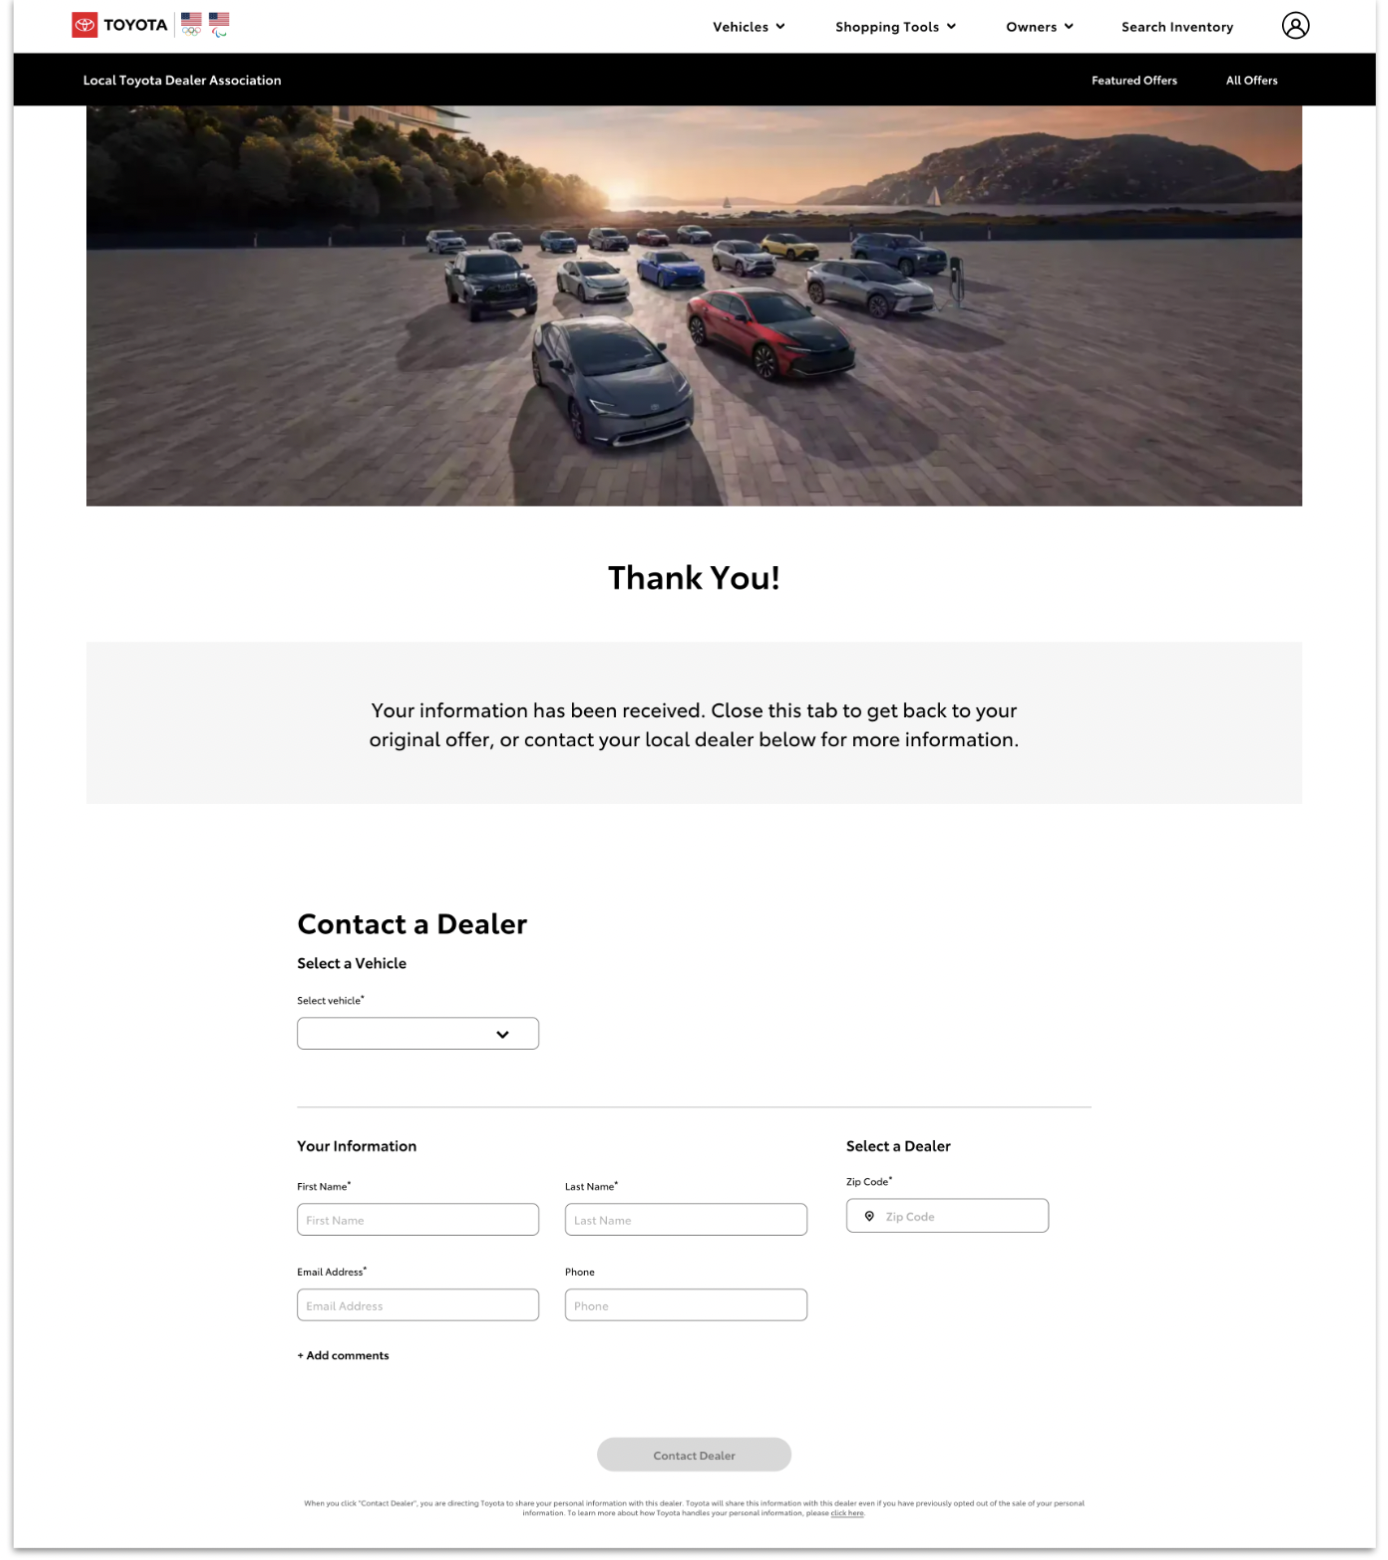 Toyota_offer_page.png